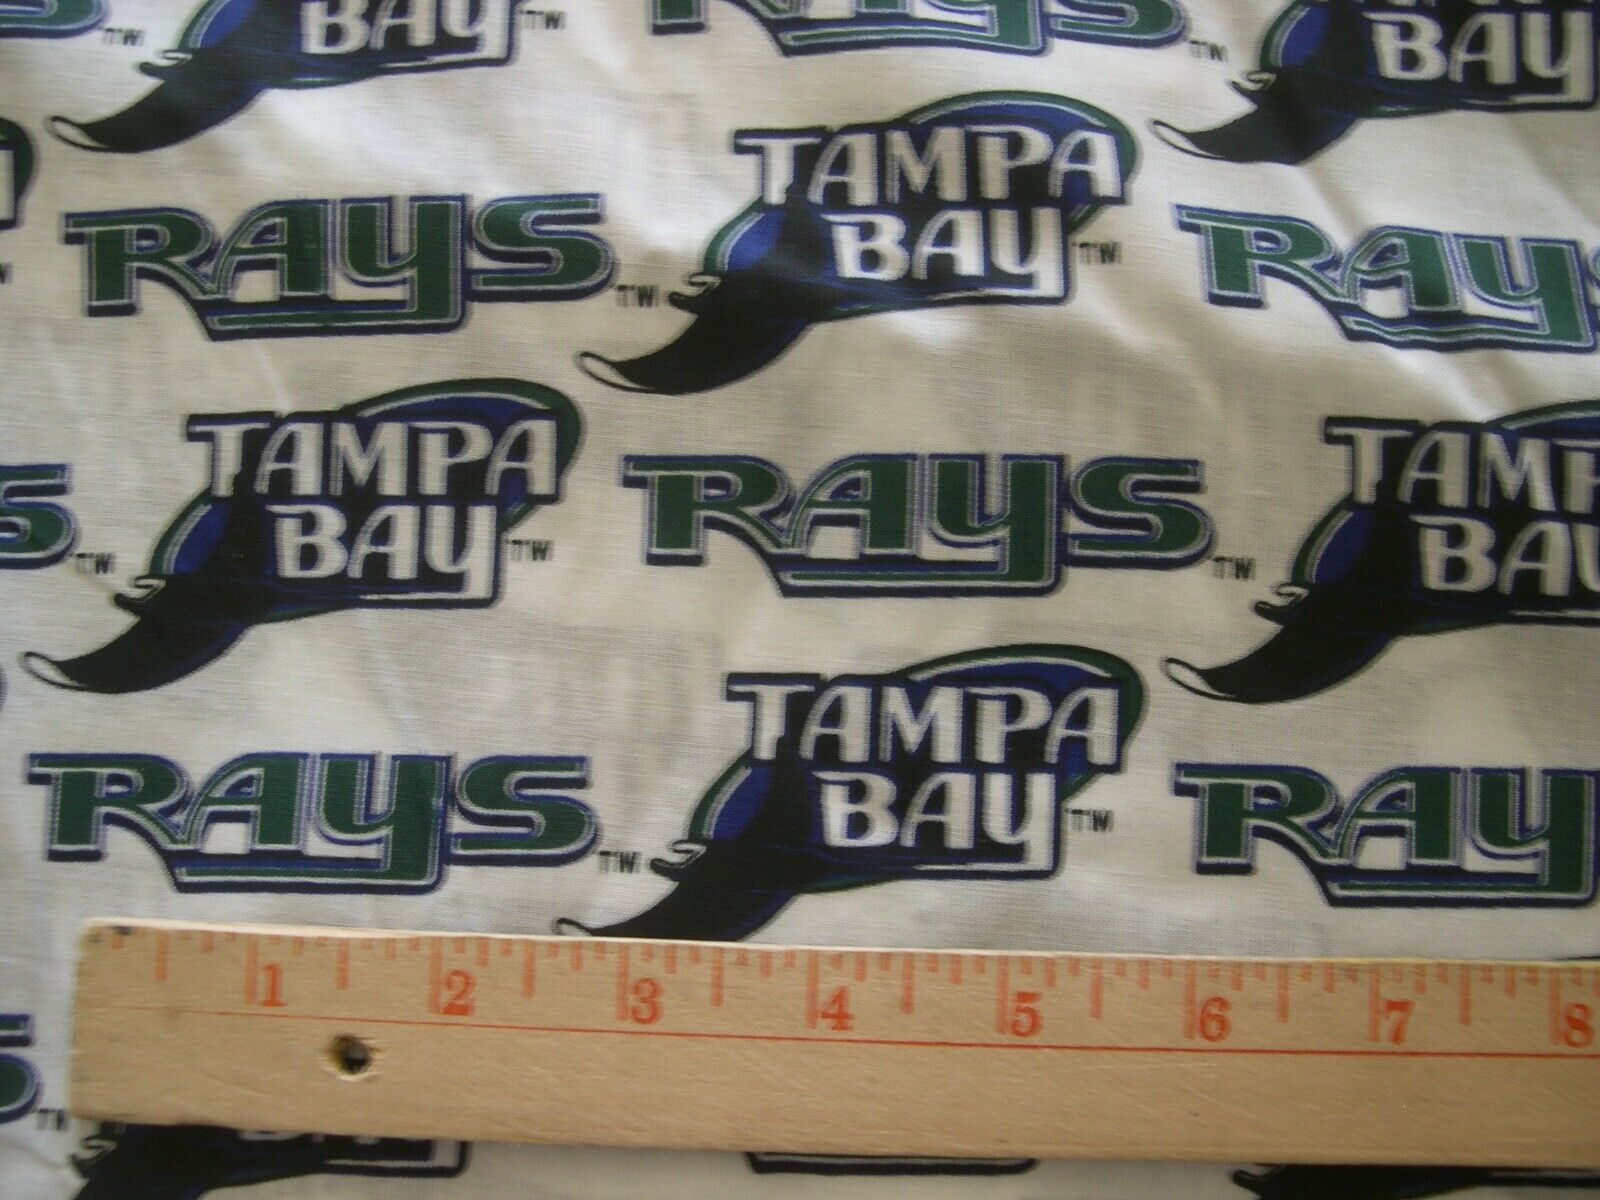 TAMPA BAY RAYS MLB COTTON FABRIC 1/2 YARD X 57" for Mask FREE SHIP Retired 18x57 - $16.99